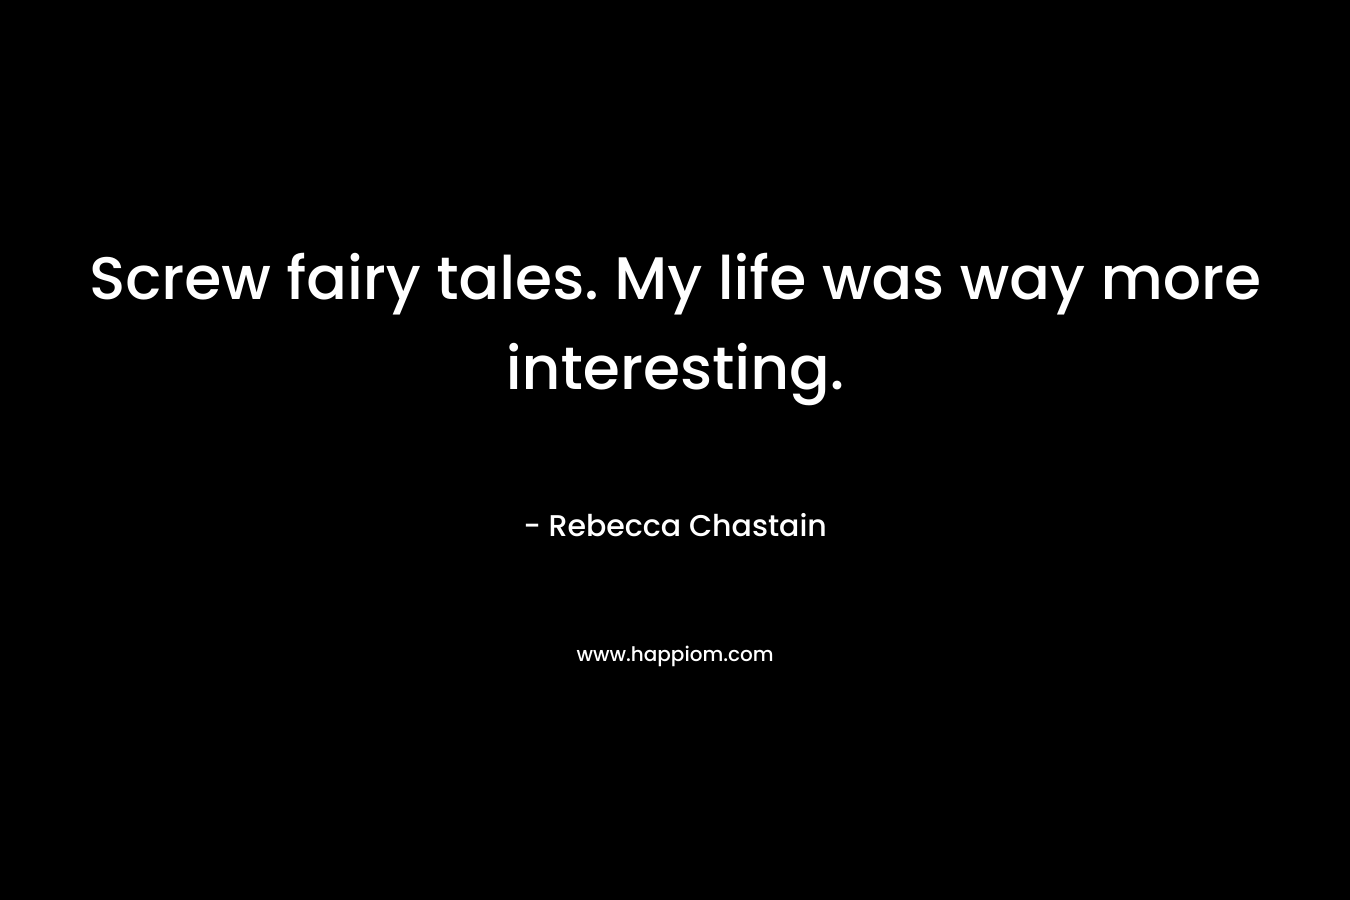 Screw fairy tales. My life was way more interesting. – Rebecca Chastain